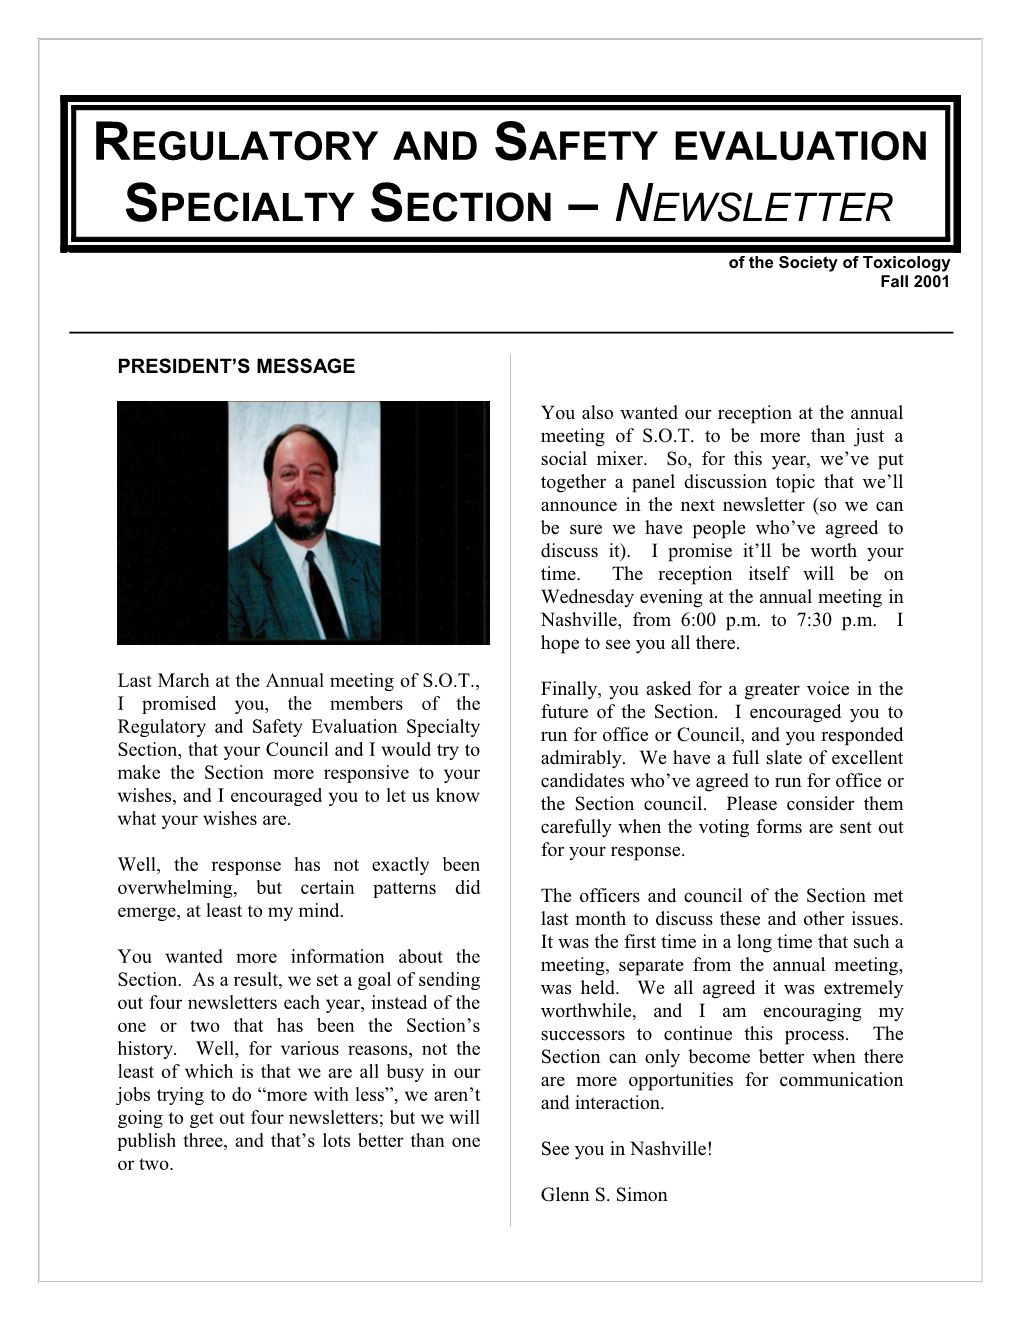 Regulatory and Safety Evaluation Specialty Section - Newsletter